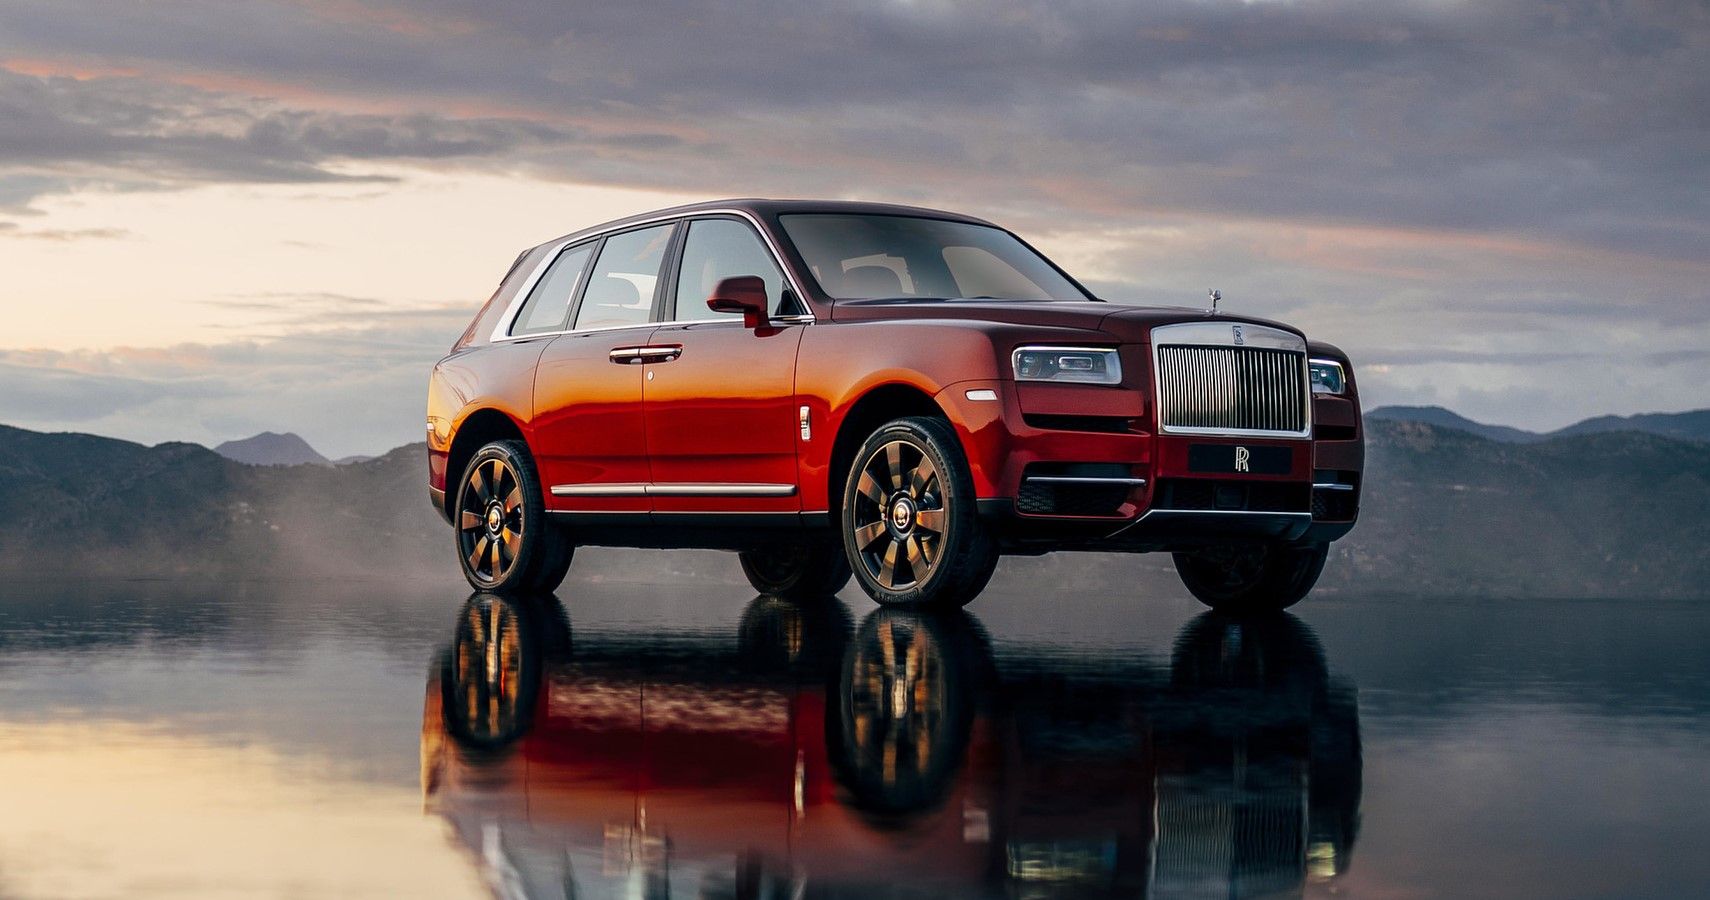 2021 Rolls Royce Cullinan: Here's What We Expect From The SUV